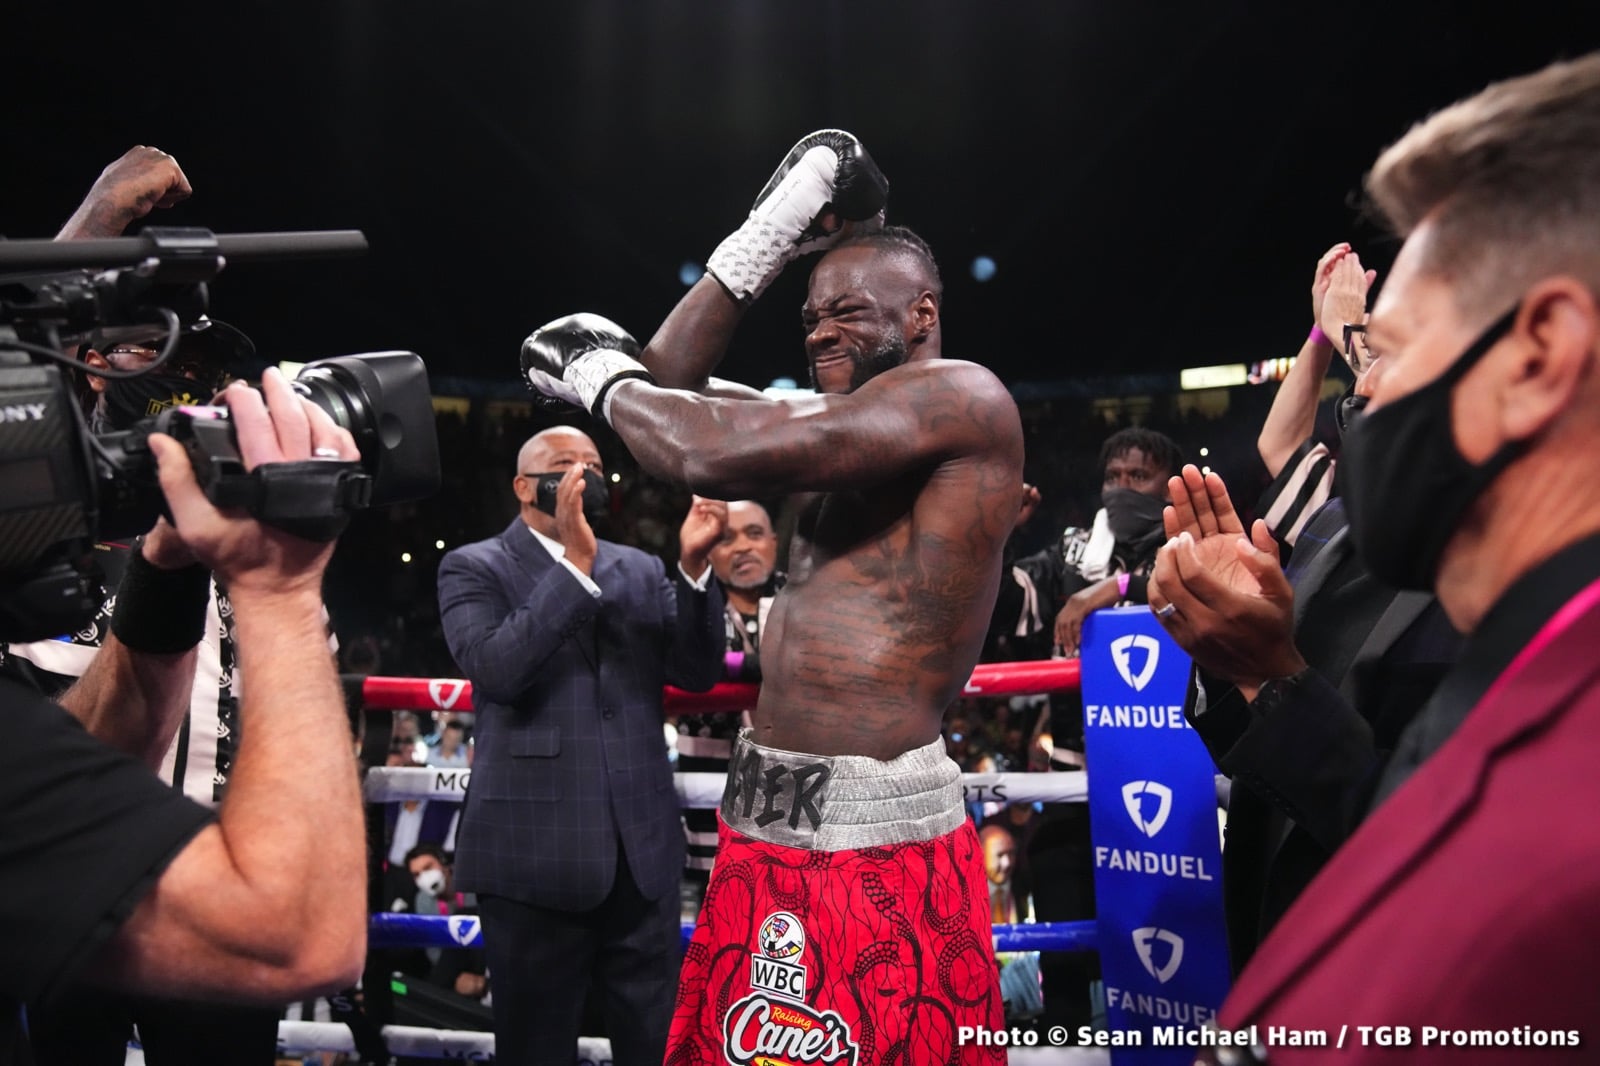 Finkel Says Deontay Wilder Will Return In The Spring/Early Summer “As Long As He's Healthy”